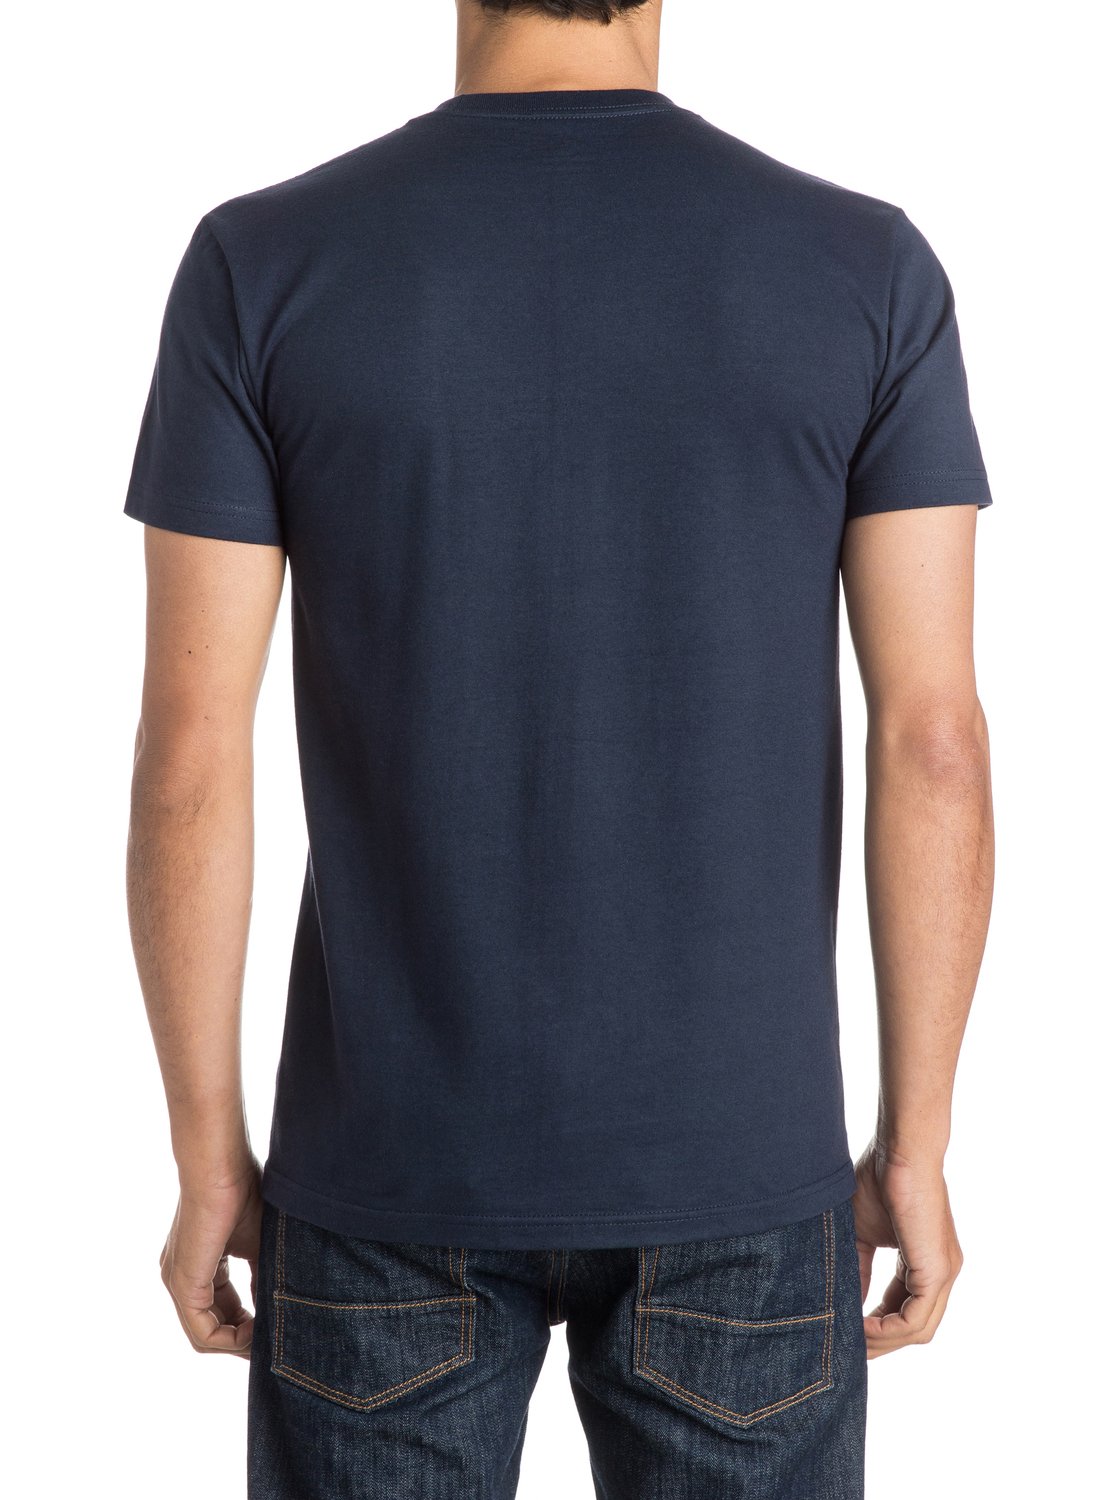 Everyday Circle T-Shirt 888701580706 | Quiksilver